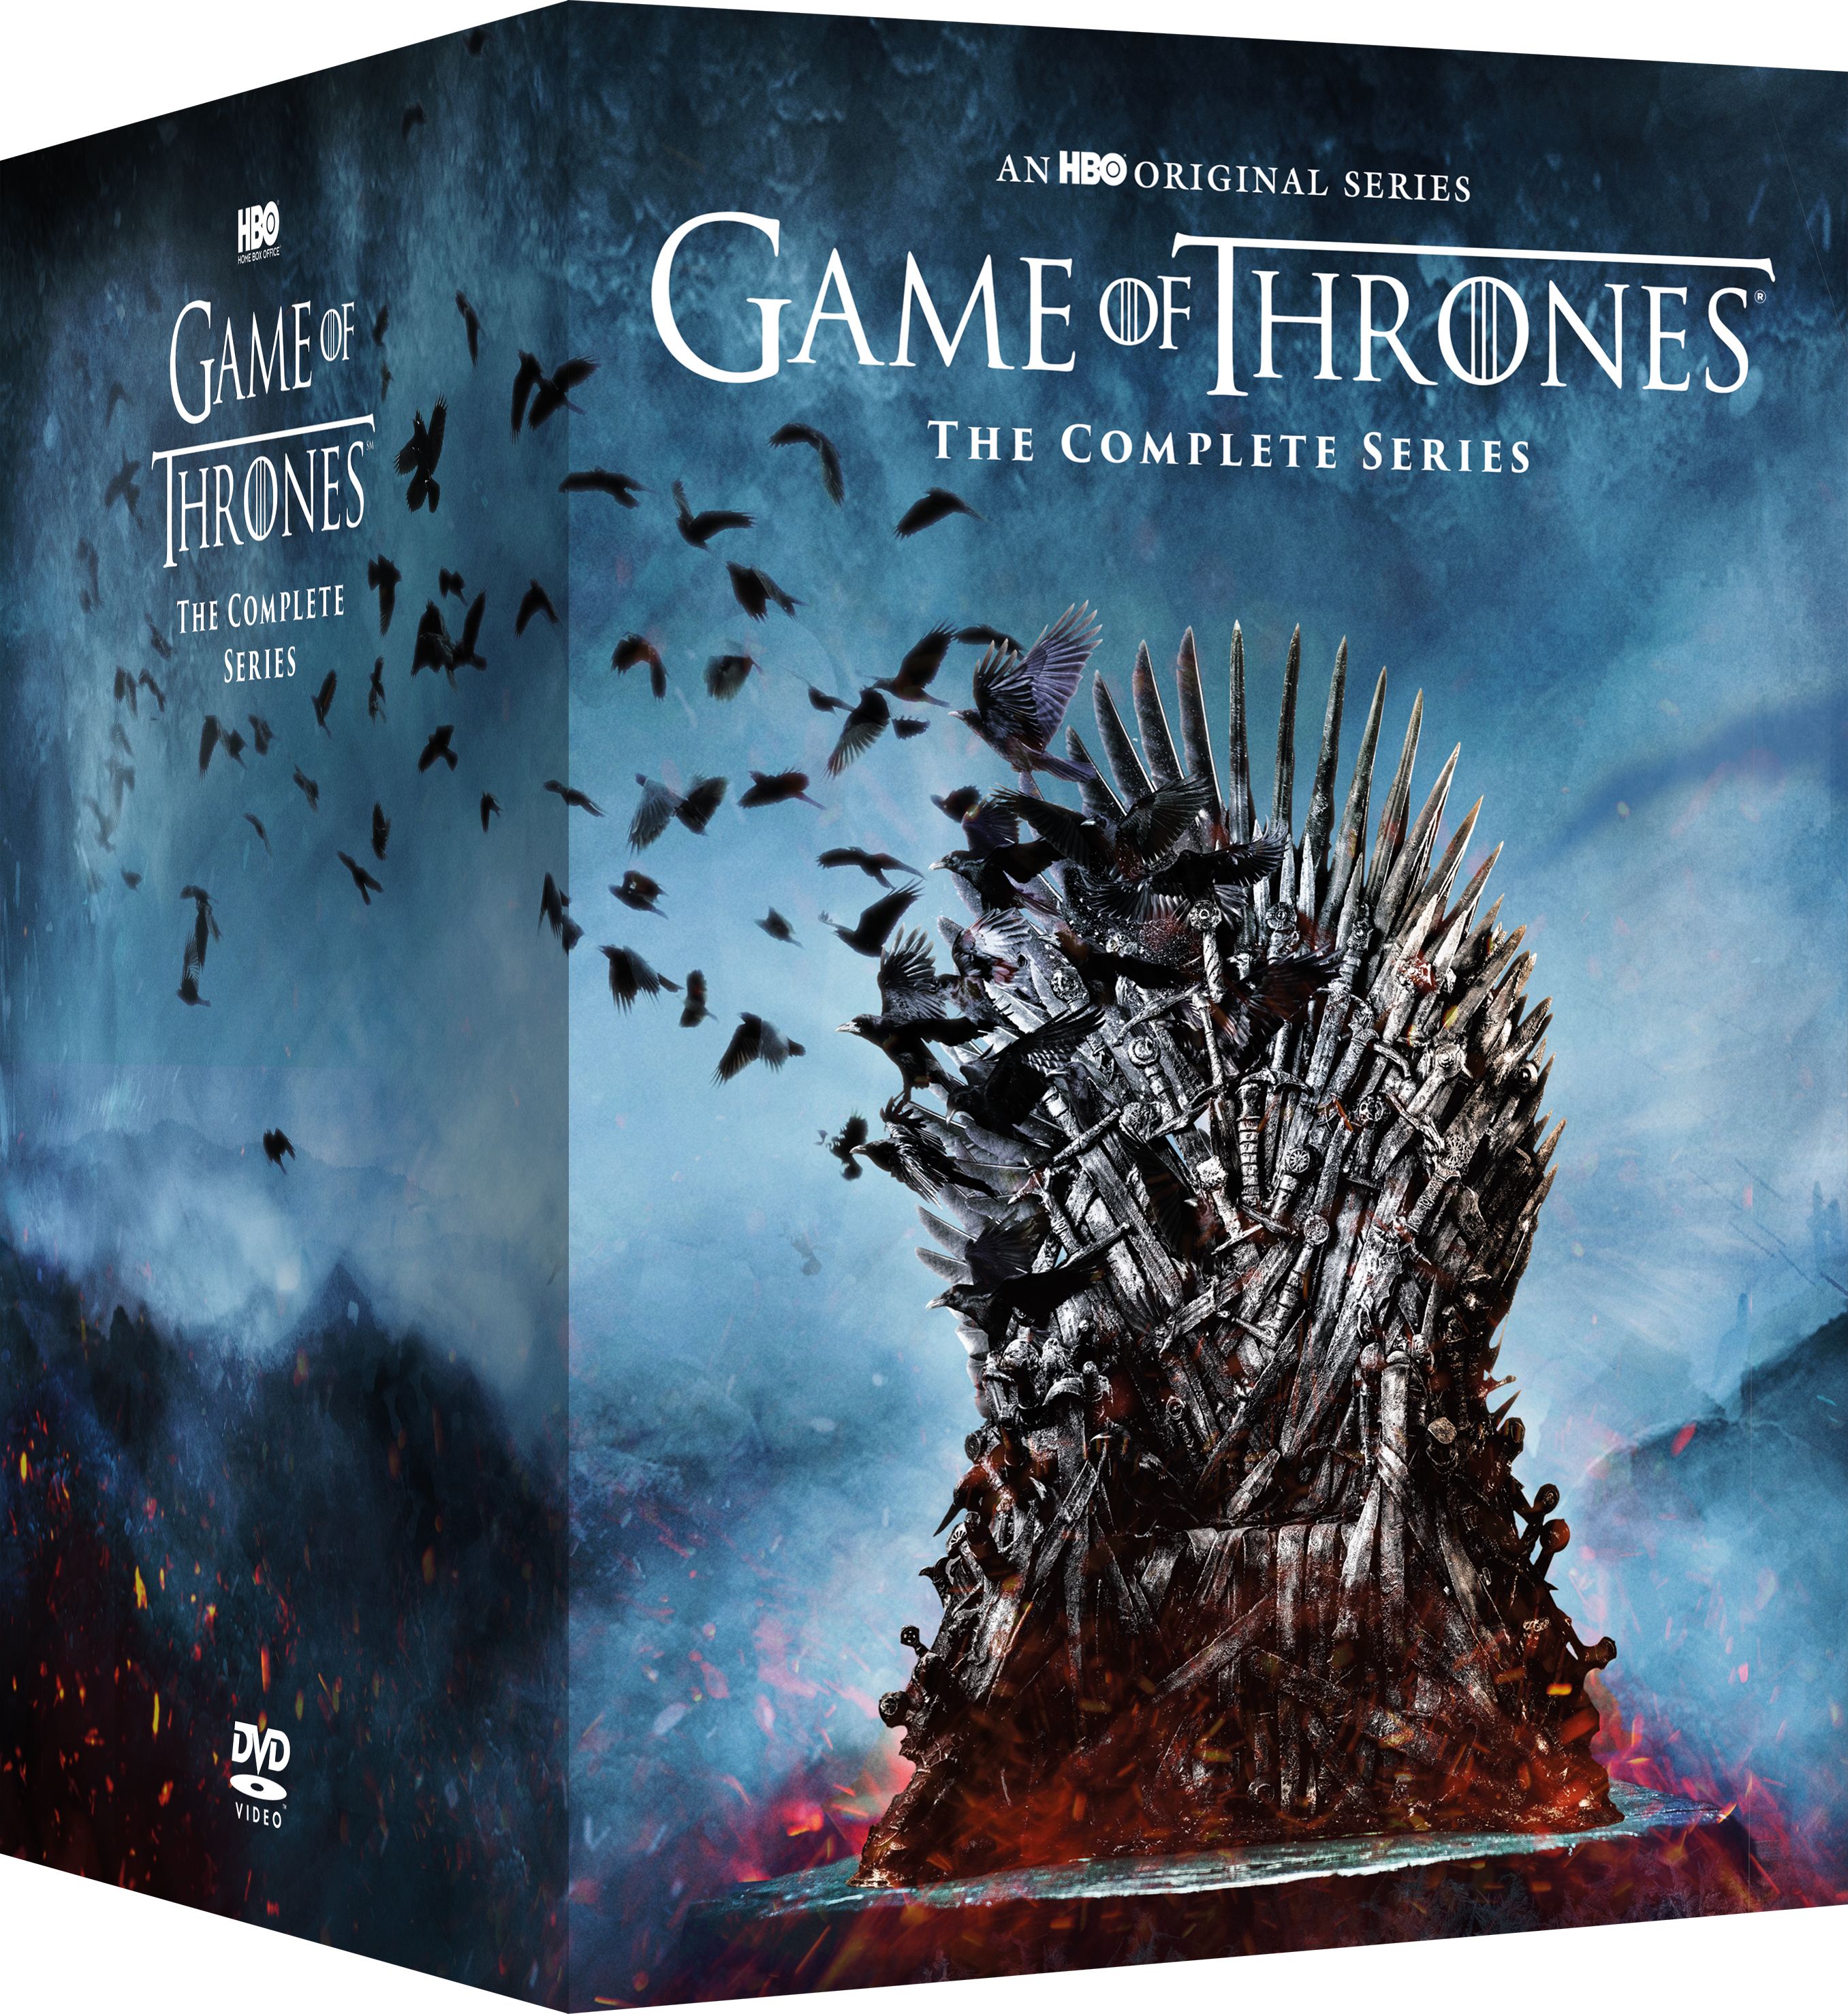 Game of Thrones the Complete Series Blu-ray